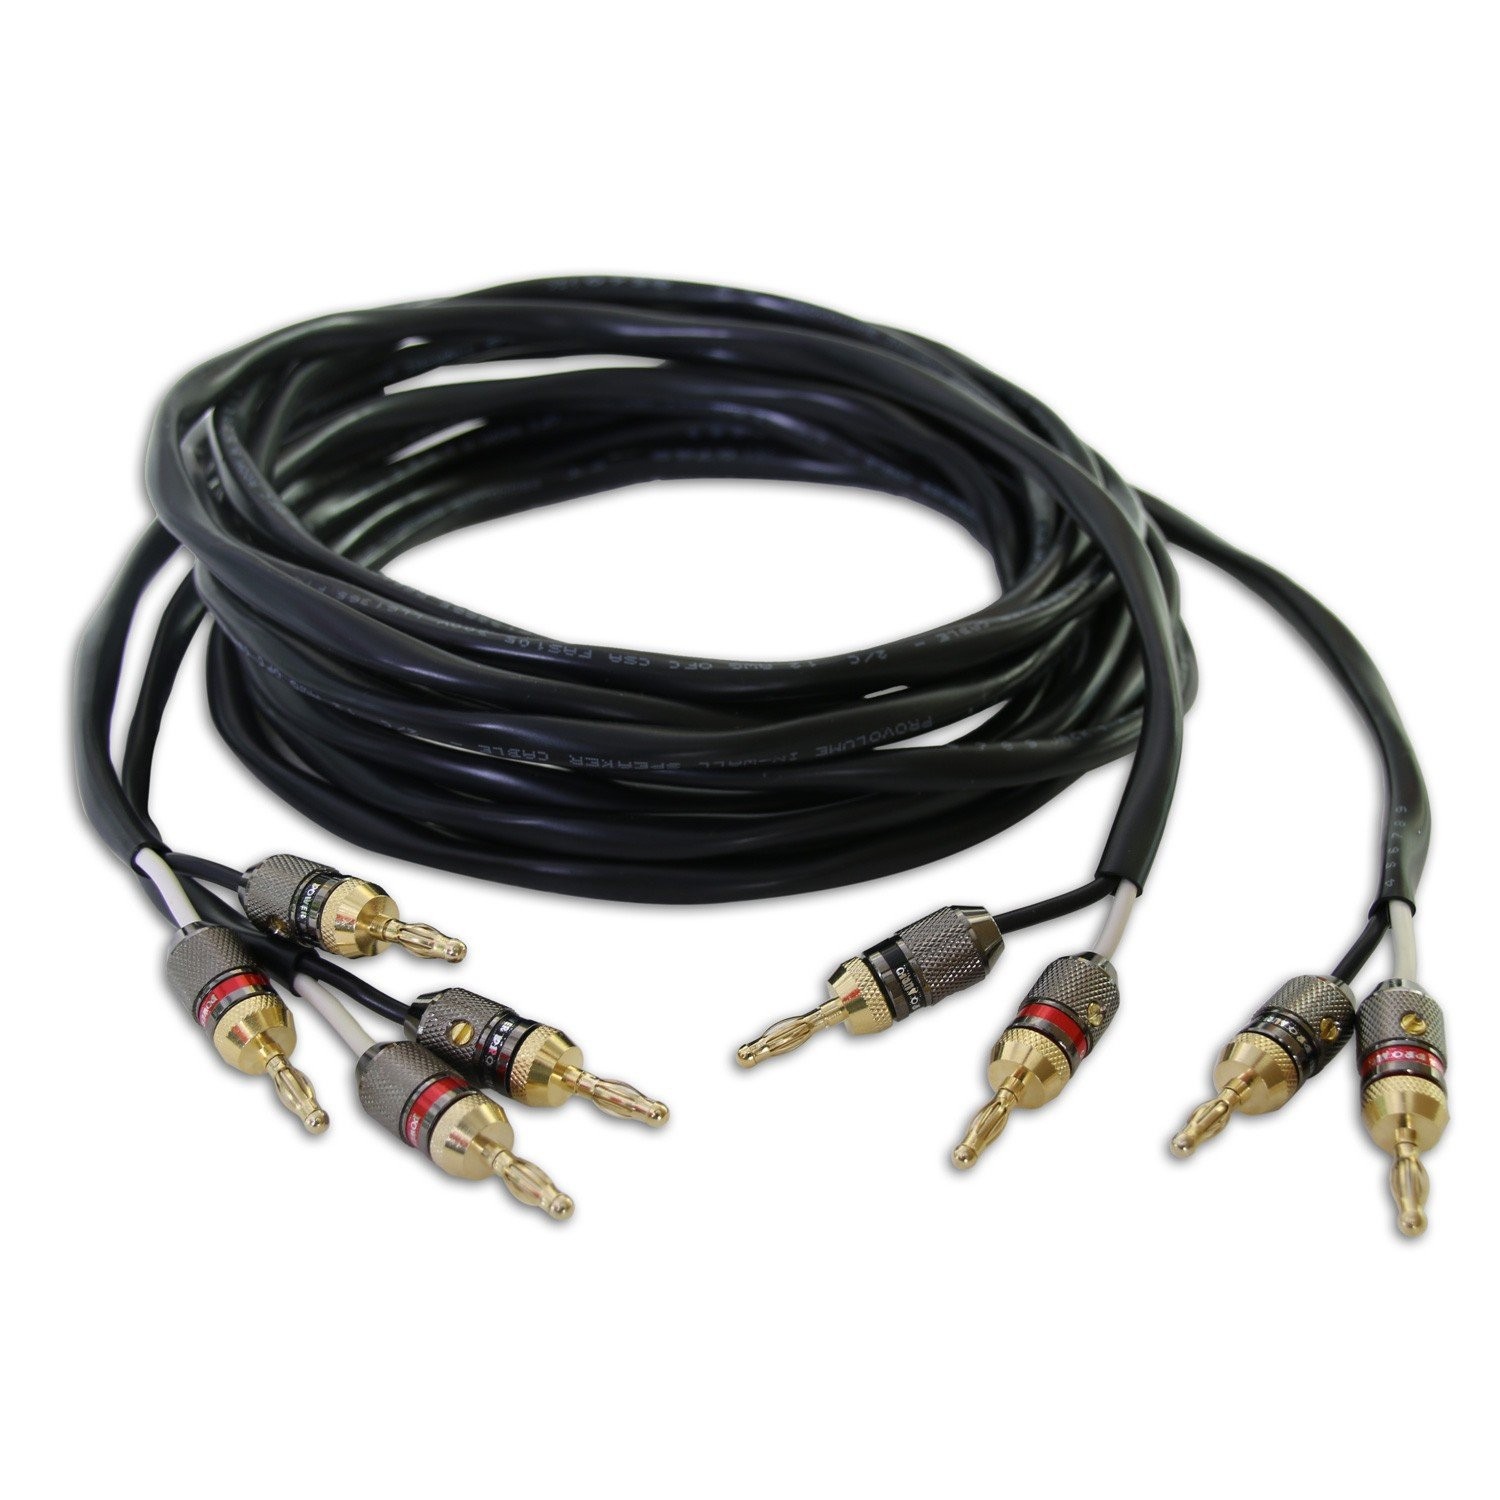 ThruSound HiFi-Series 12AWG 2-Conductor Speaker Wire with Premium 24k Gold-Plated Banana Plugs (15 Feet/Pair)